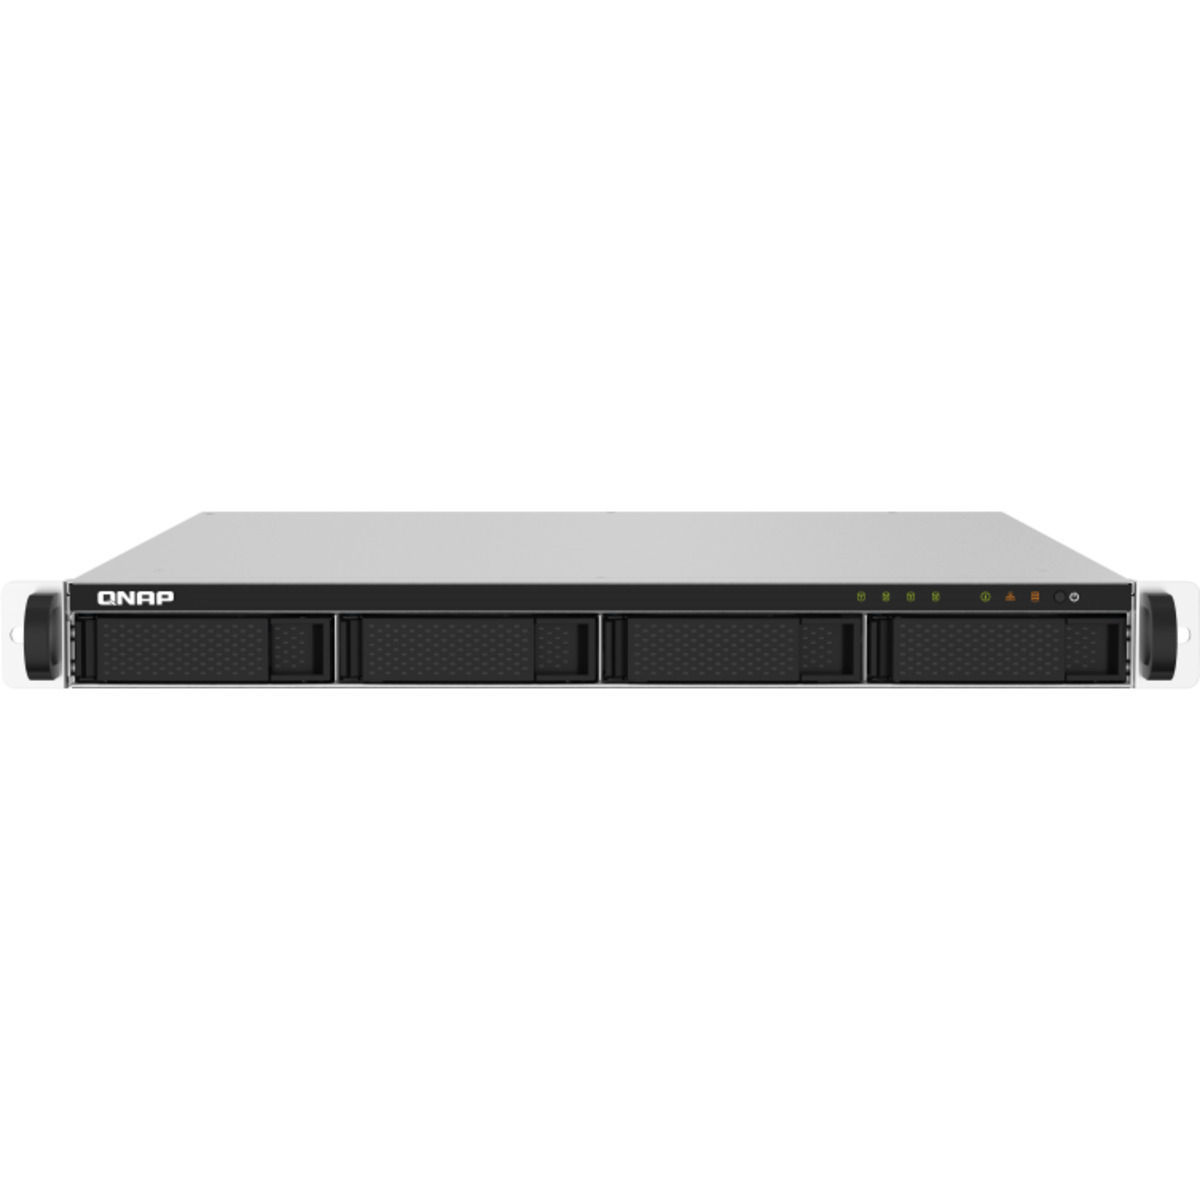 QNAP TS-432PXU-RP 36tb 4-Bay RackMount Personal / Basic Home / Small Office NAS - Network Attached Storage Device 2x18tb Western Digital Ultrastar DC HC550 WUH721818ALE6L4 3.5 7200rpm SATA 6Gb/s HDD ENTERPRISE Class Drives Installed - Burn-In Tested - FREE RAM UPGRADE TS-432PXU-RP